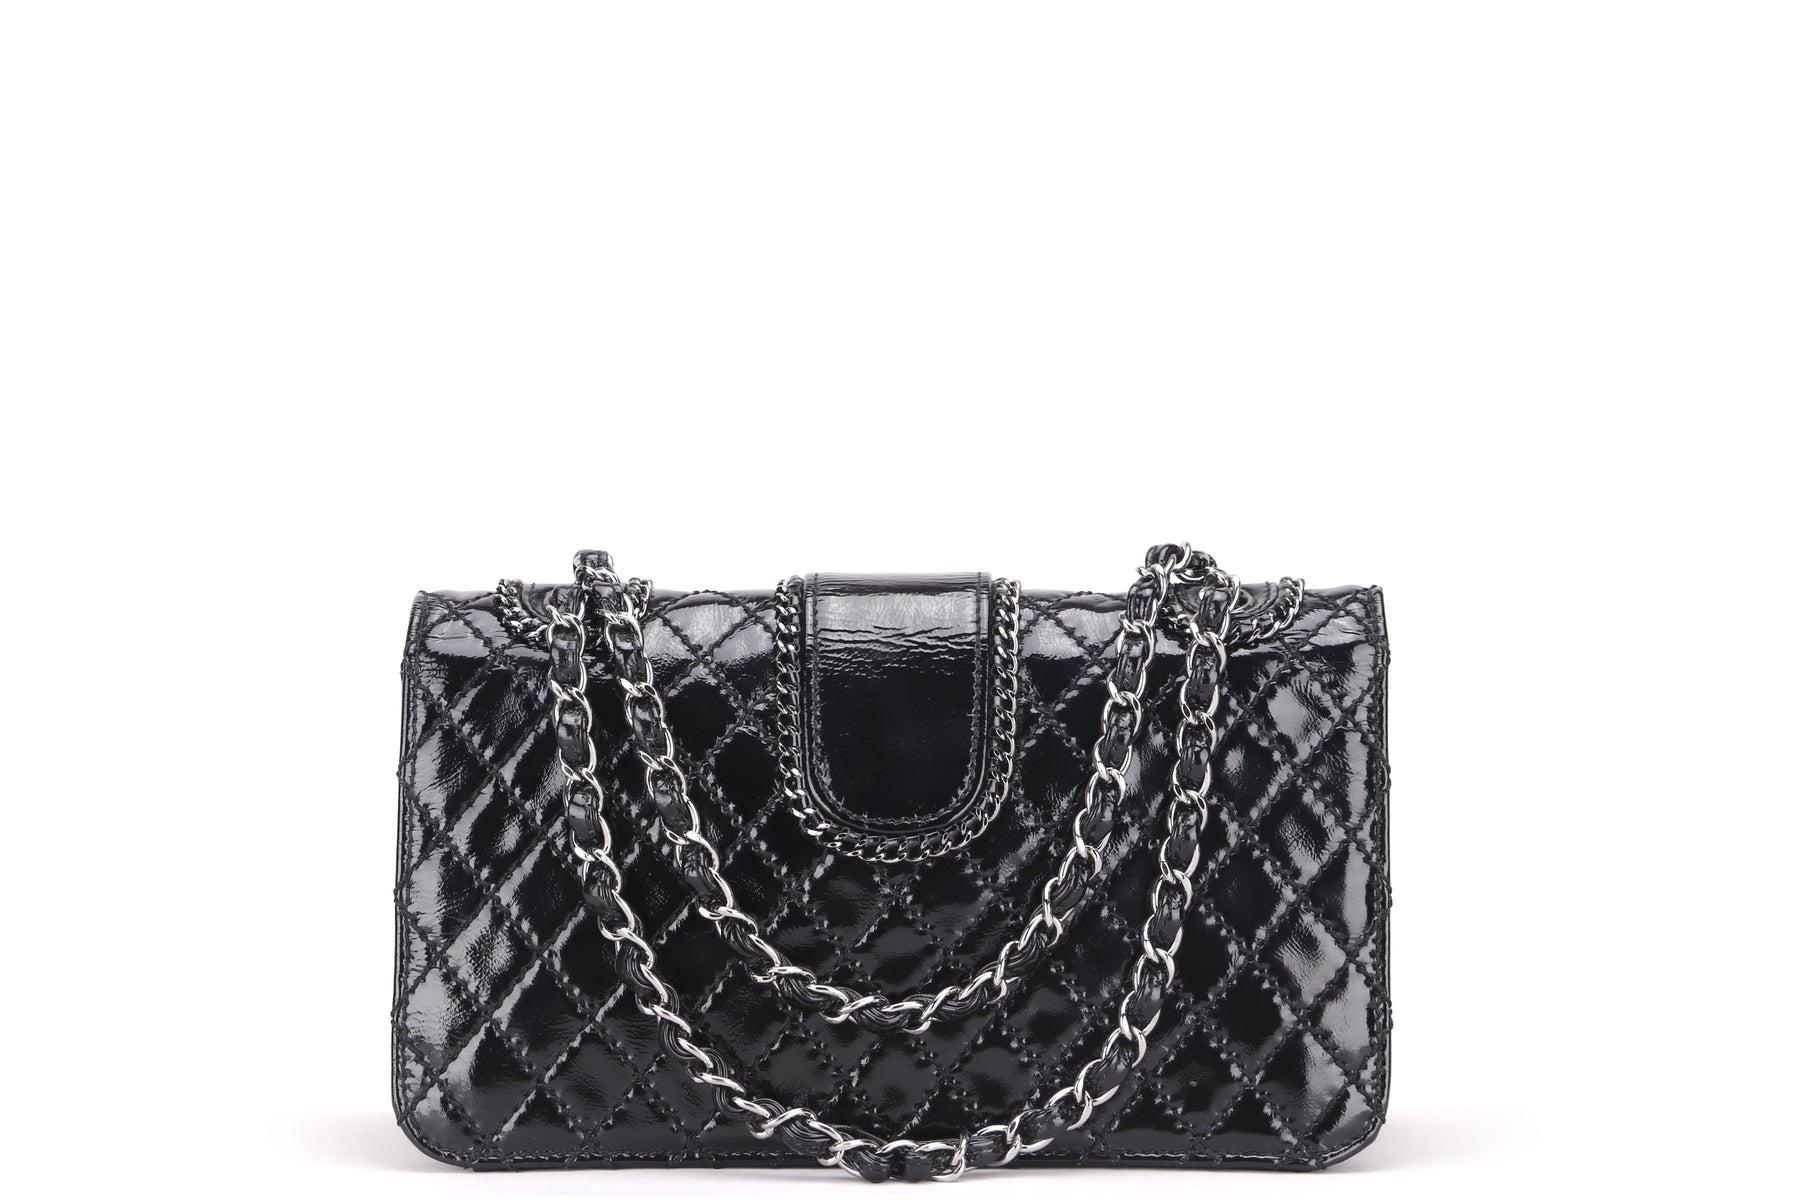 Chanel 2006 Vintage Patent Quilted Double Chain Shoulder Classic Flap Bag In Good Condition For Sale In Miami, FL